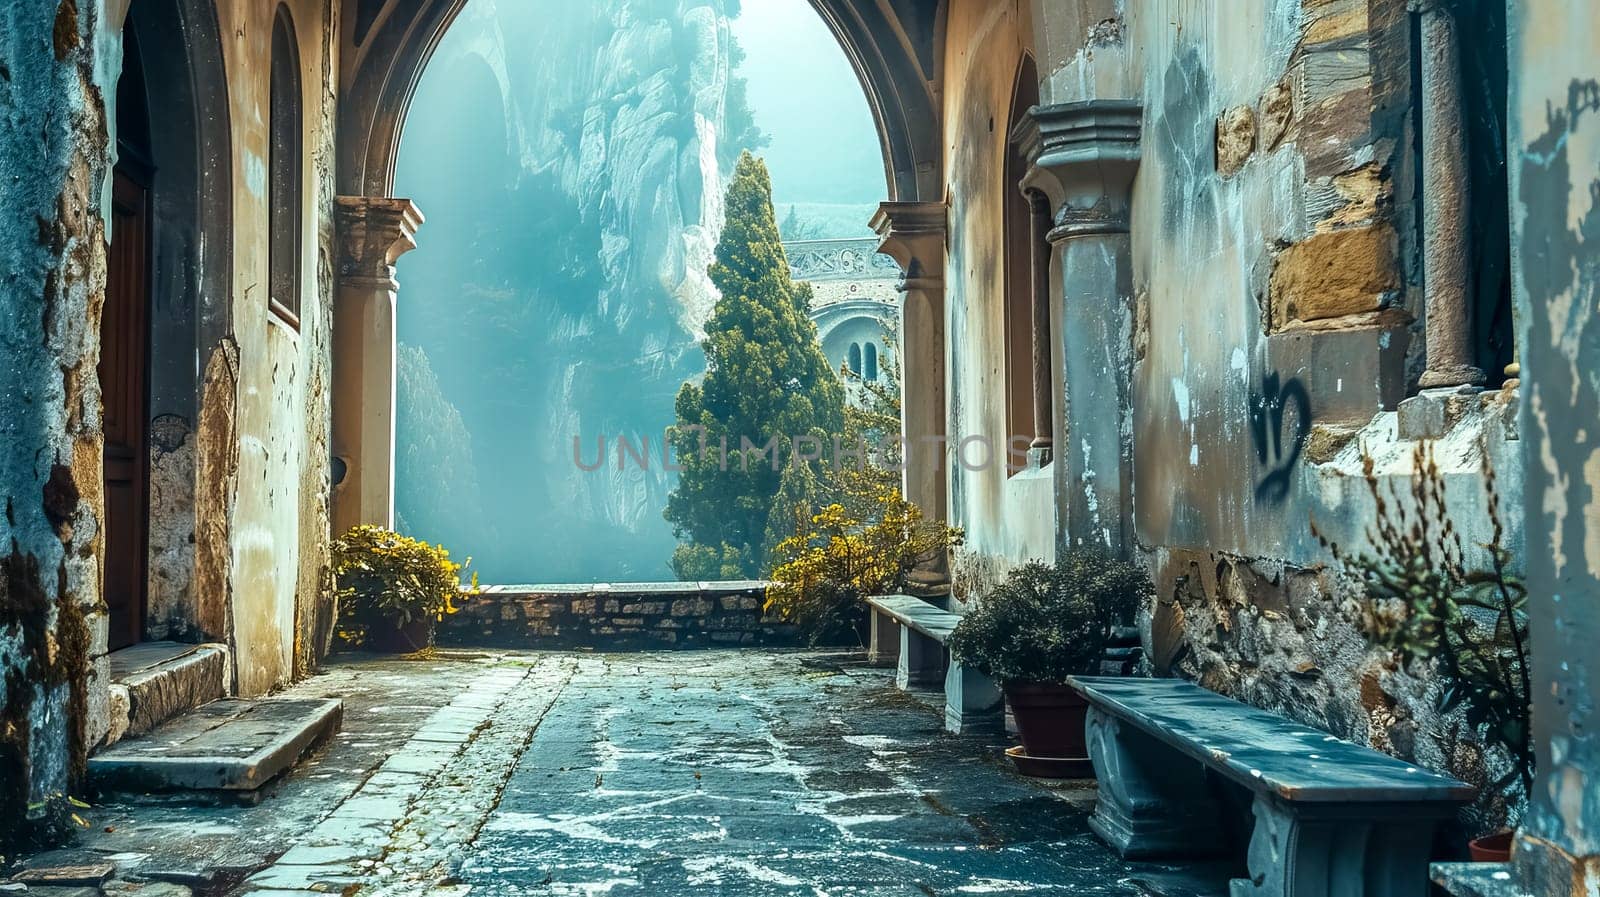 Serene view of an old, mystical courtyard with gothic arches and foggy ambiance